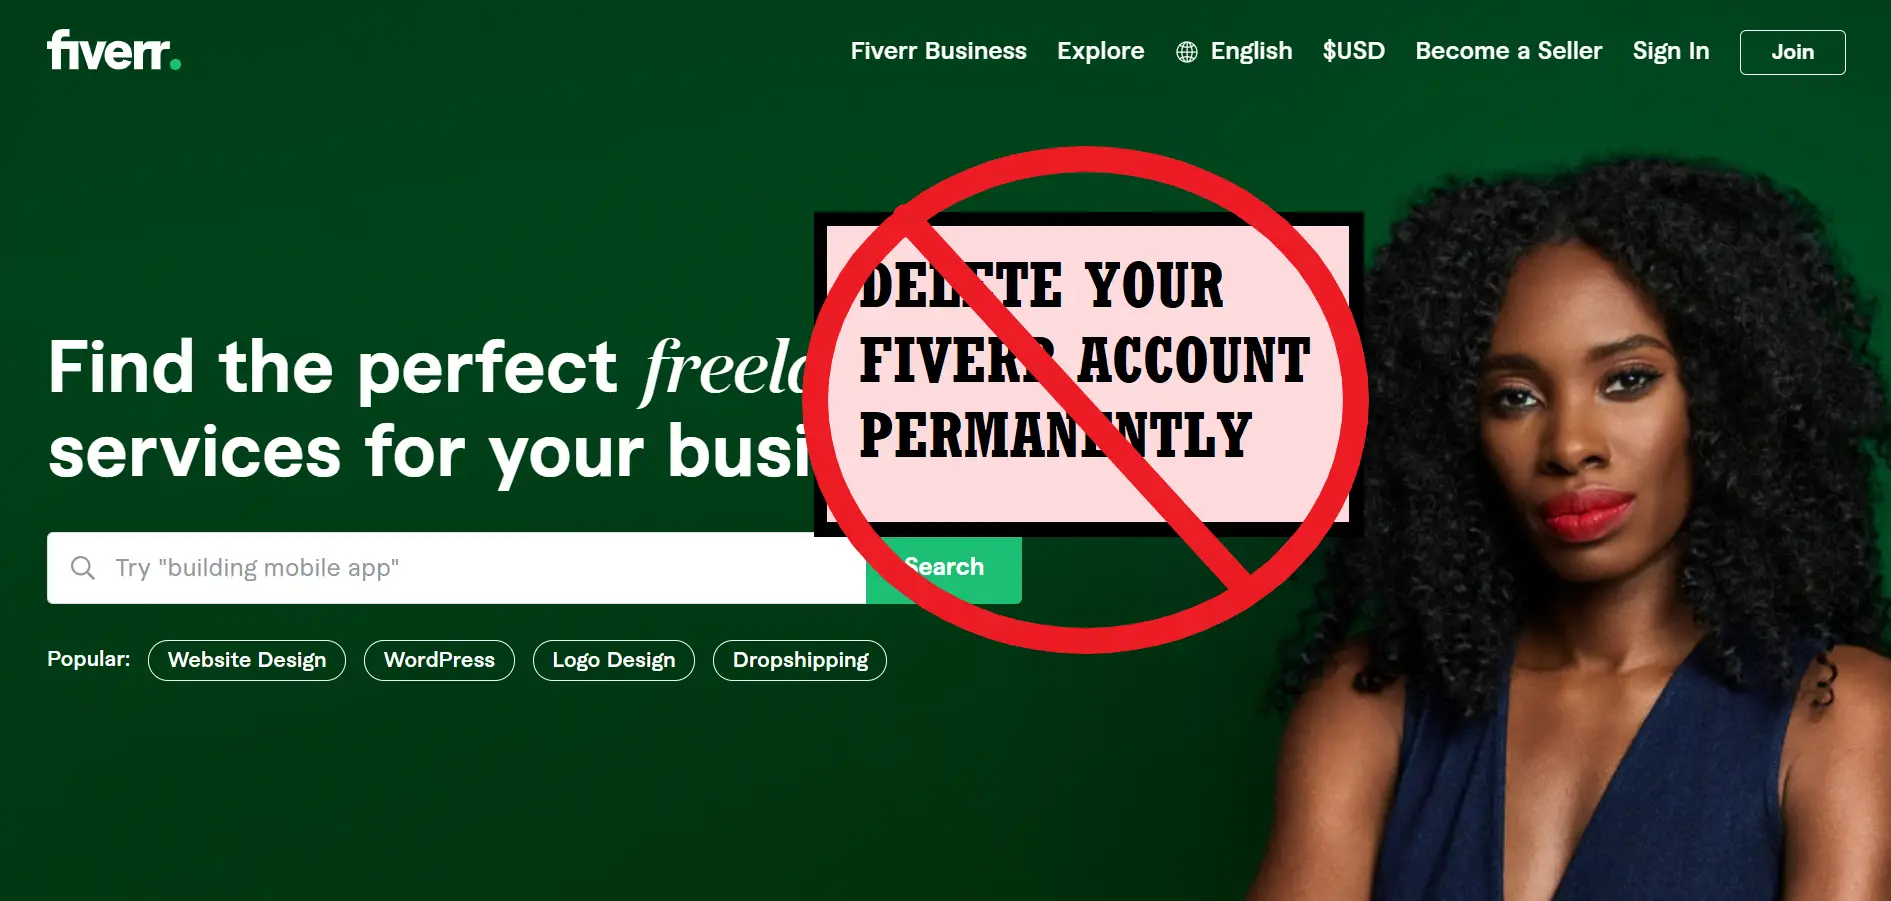 How to delete your Fiverr account?